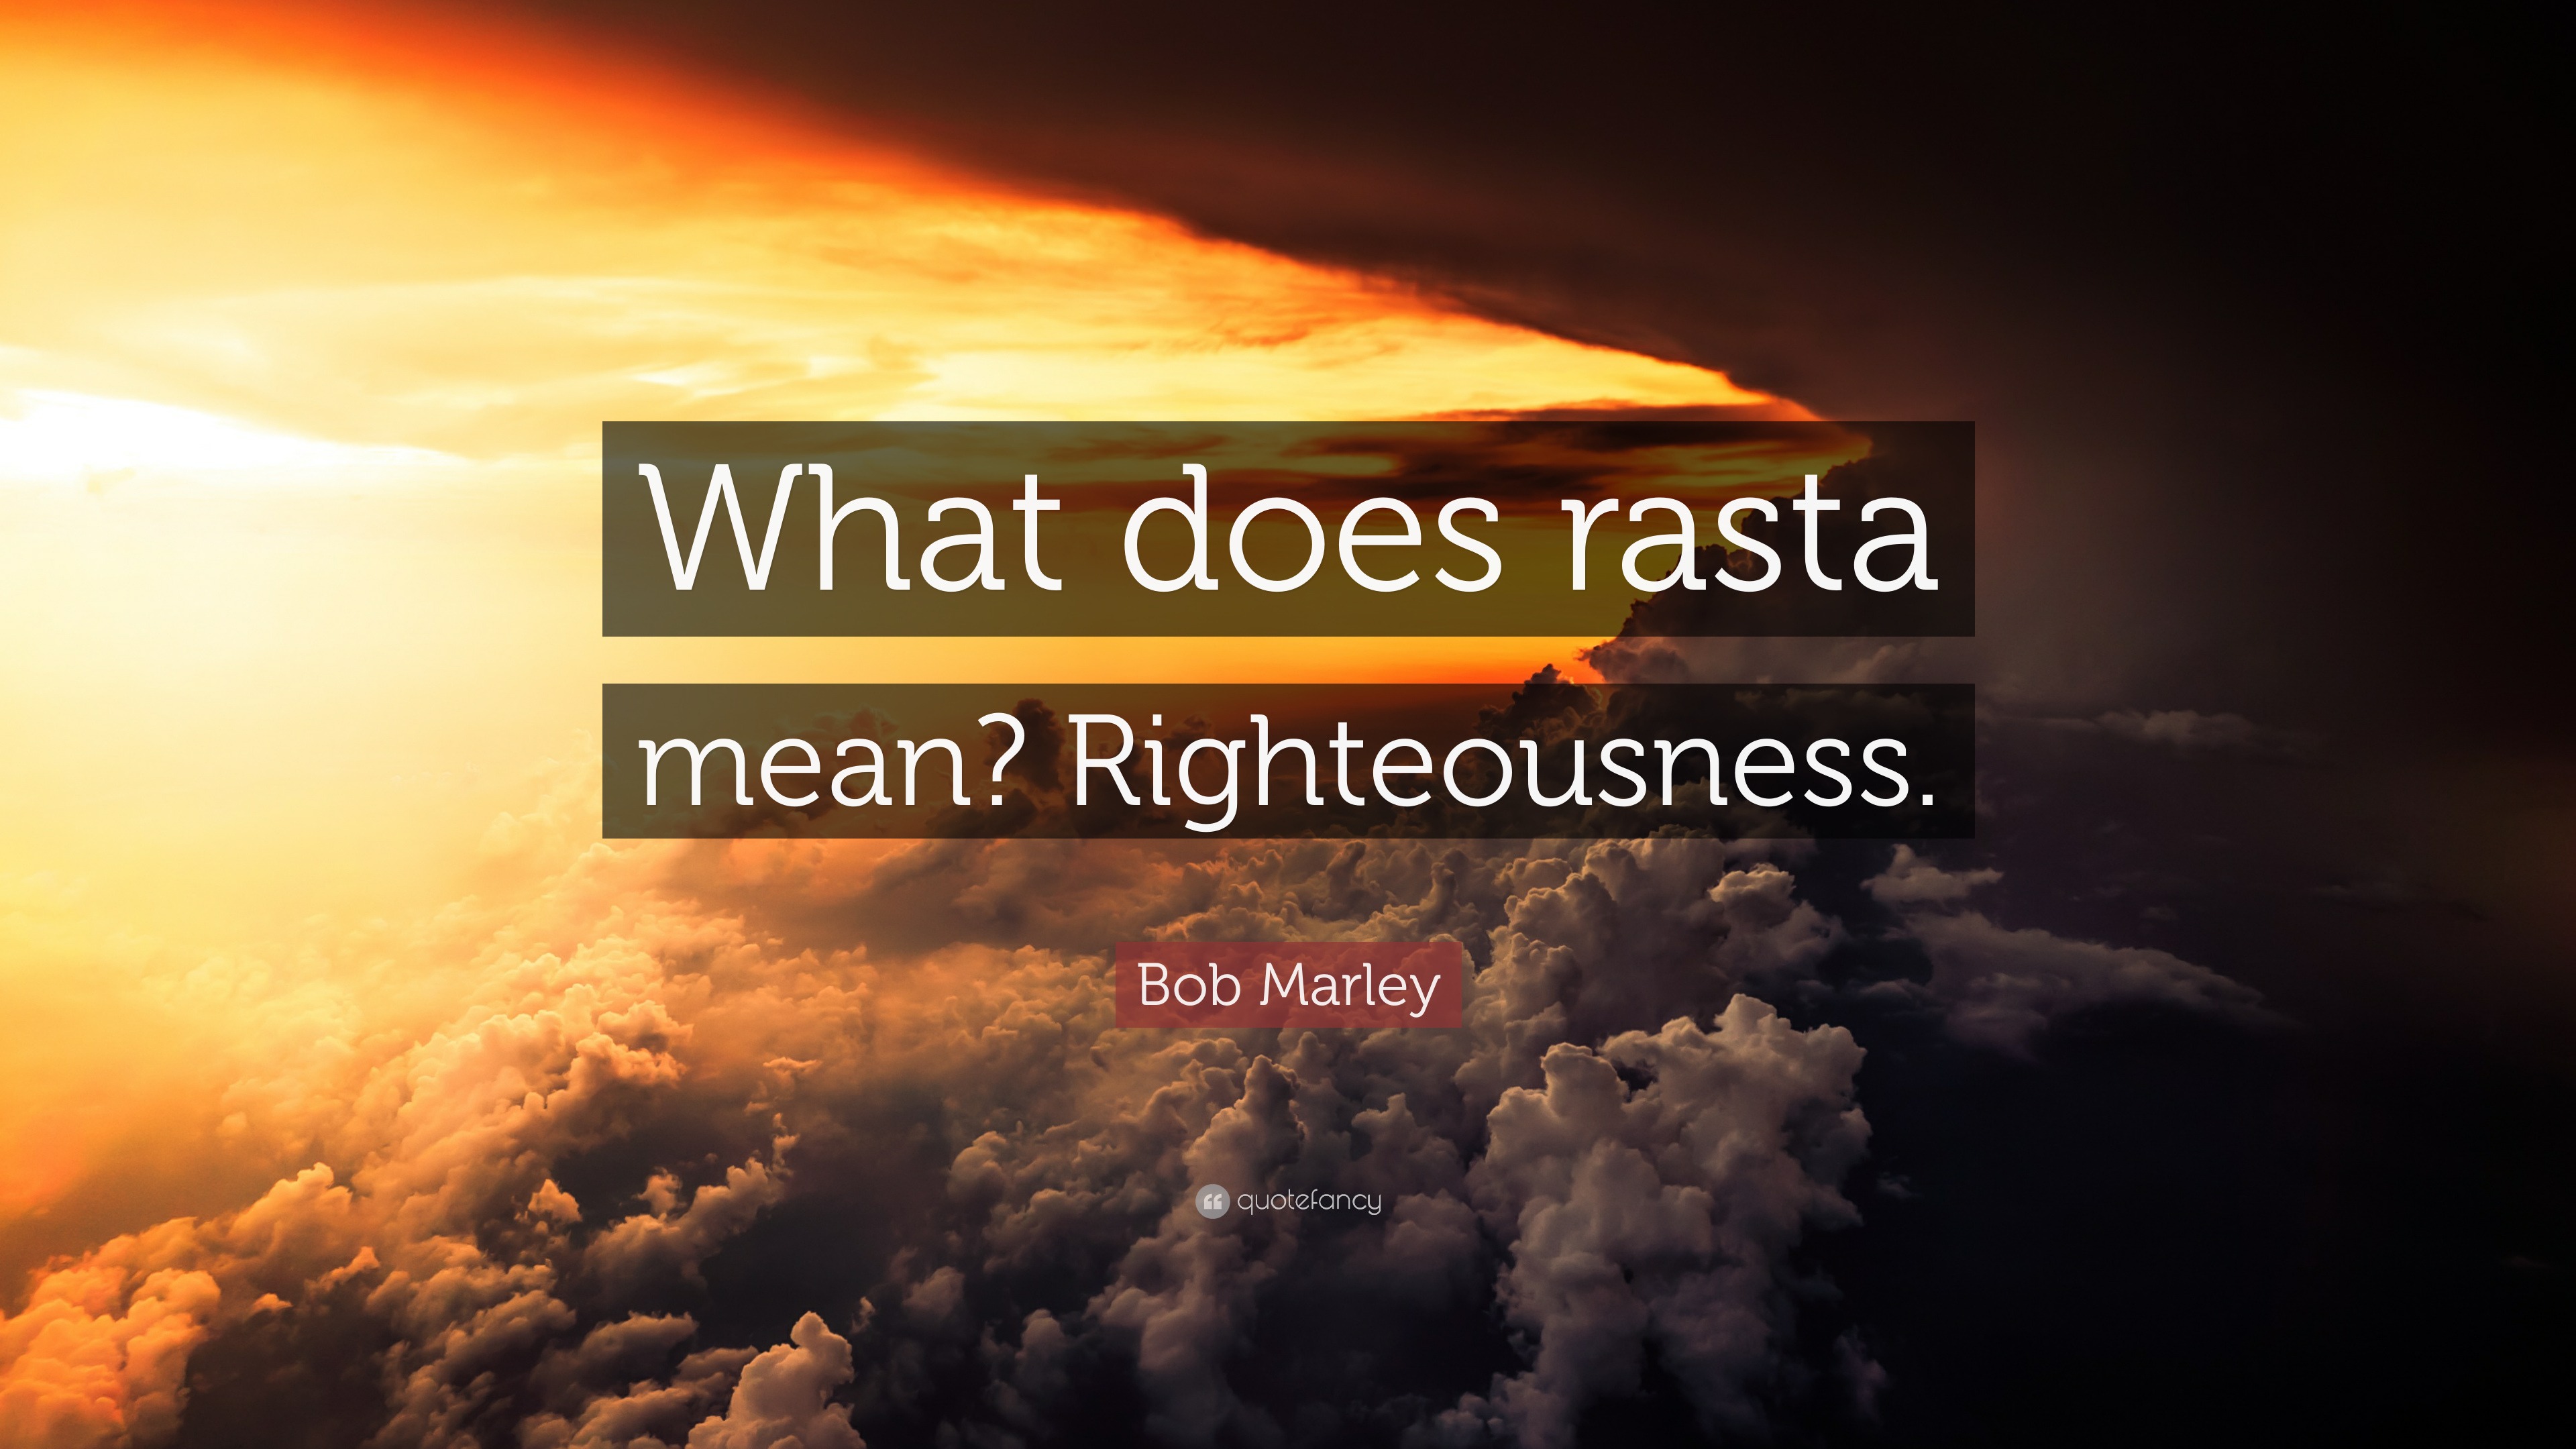 Bob Marley Quote: "What does rasta mean? Righteousness ...